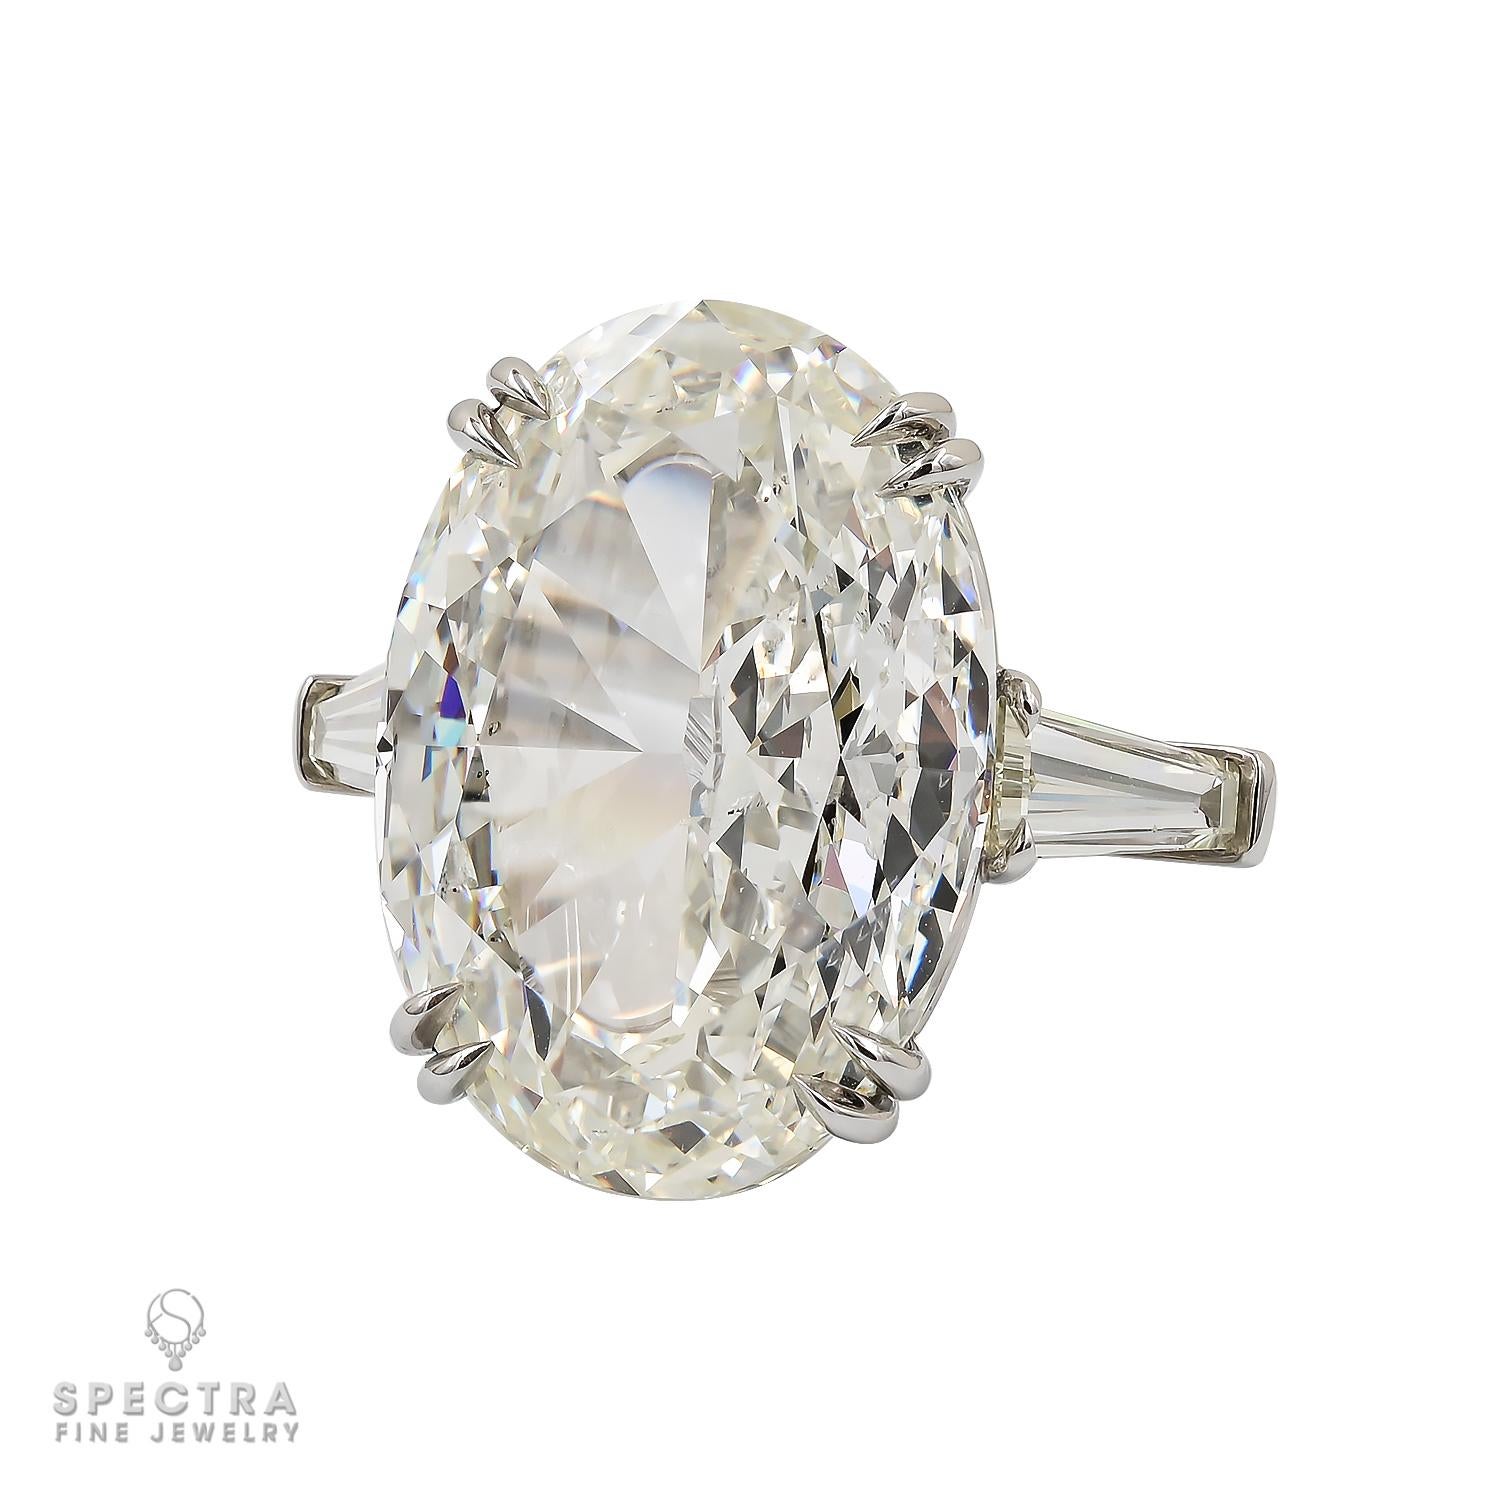 This exquisite engagement ring made by Spectra Fine Jewelry features a dazzling 20.07ct oval-cut diamond at its center, certified by the Gemological Institute of America (GIA) with a color grade of L and a clarity grade of SI2.

The centerpiece is